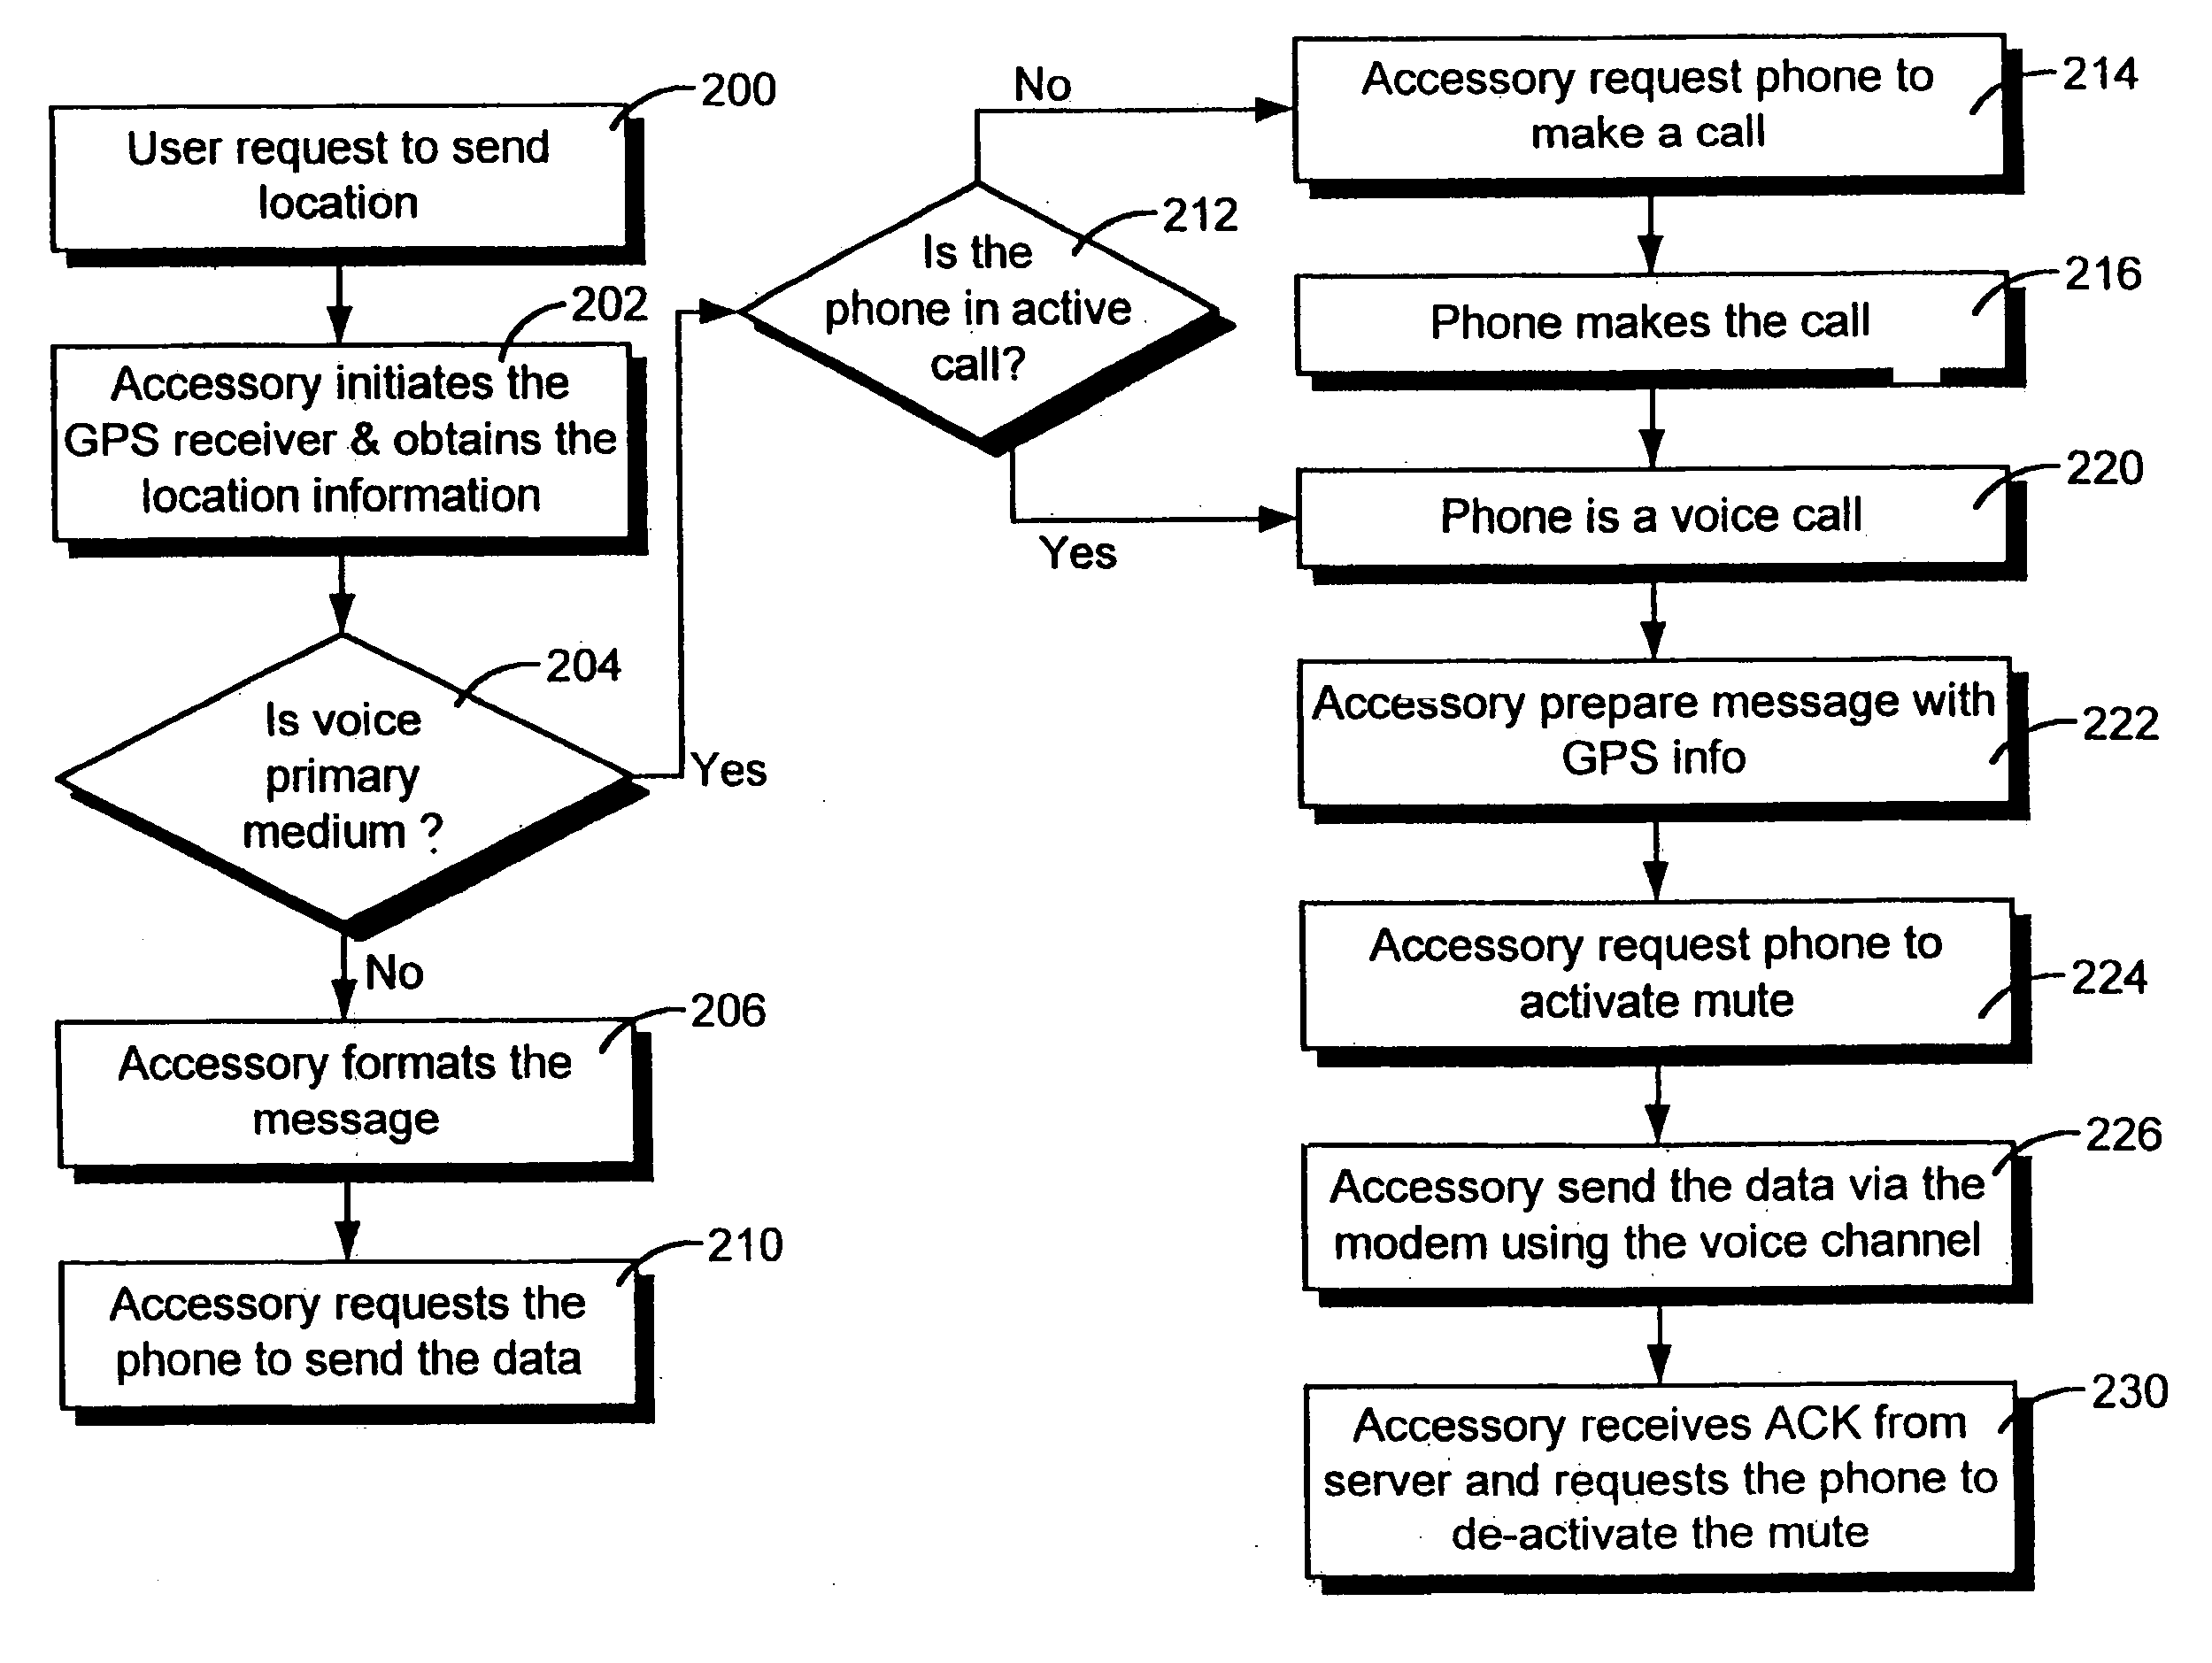 Facility and method for wireless transmission of location data in a voice channel of a digital wireless telecommunications network